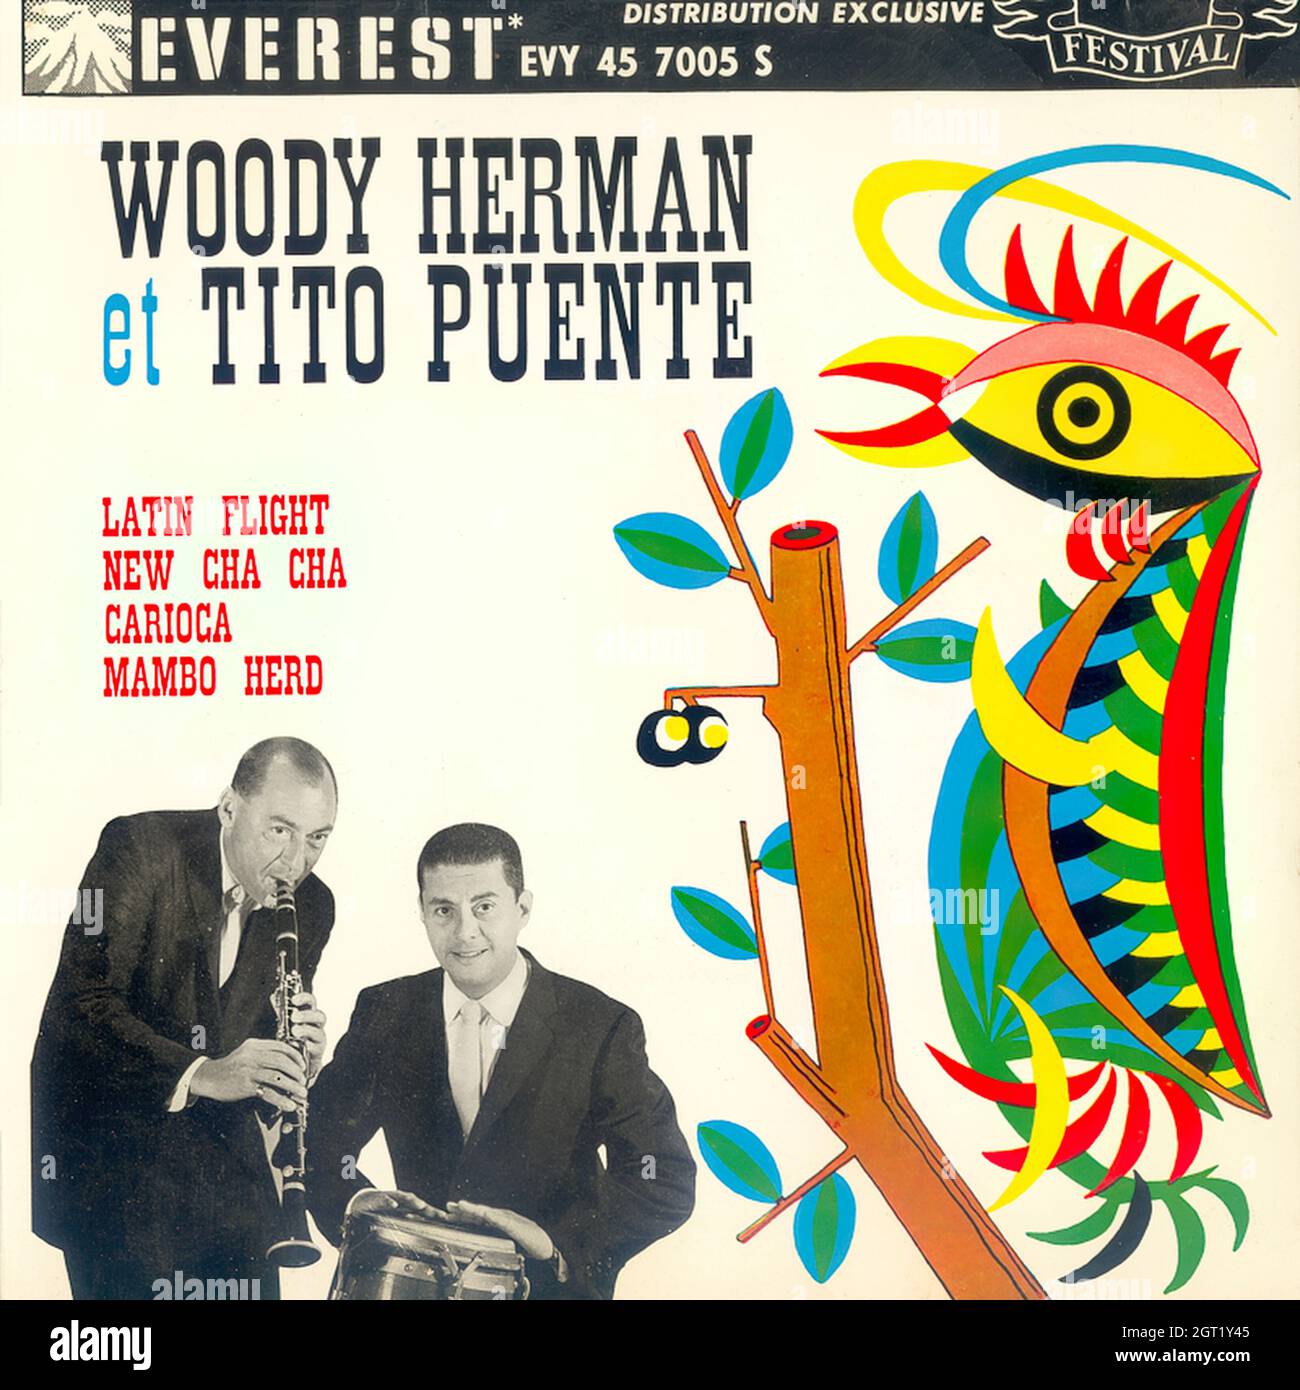 Woody Herman et Tito Puente - Self titled EP - Vintage Vinyl Record Cover Stock Photo